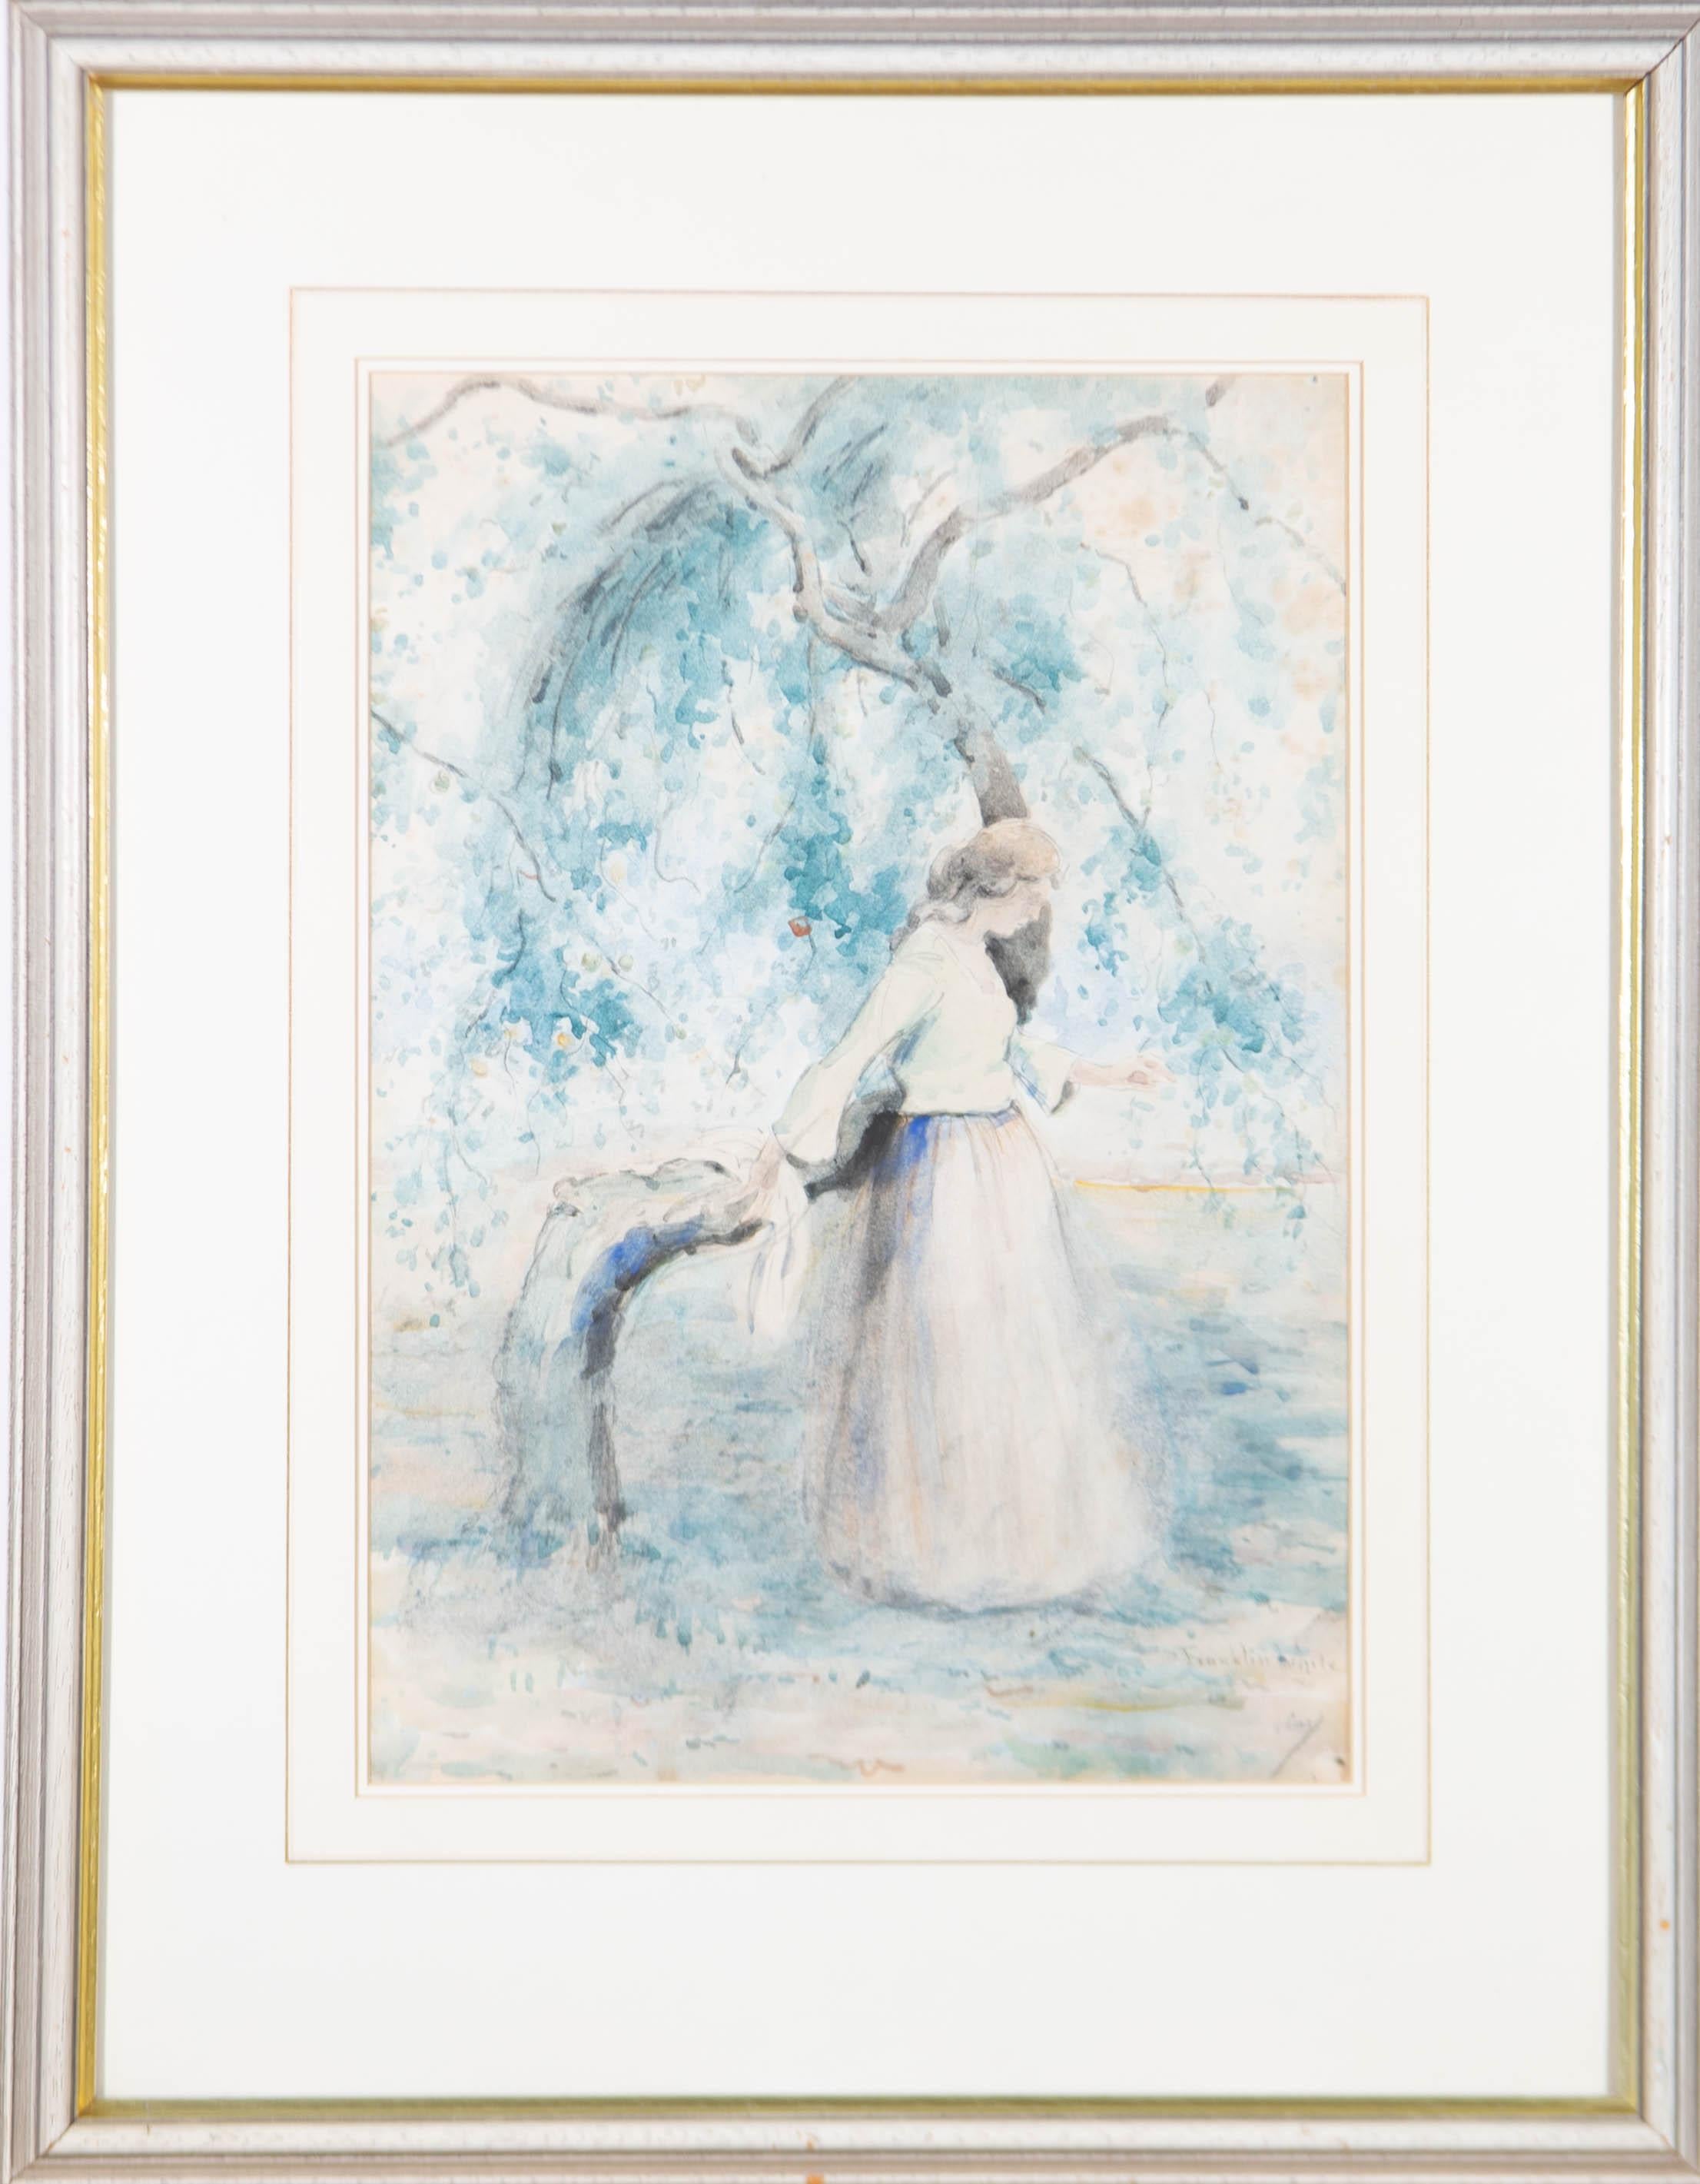 A delicate watercolour study by the artist Franklin White (1892-1975), depicting a young woman resting beneath an apple tree. The subtle colours and delicate application of paint is typical of White's style, and gives a dream-like feel to the